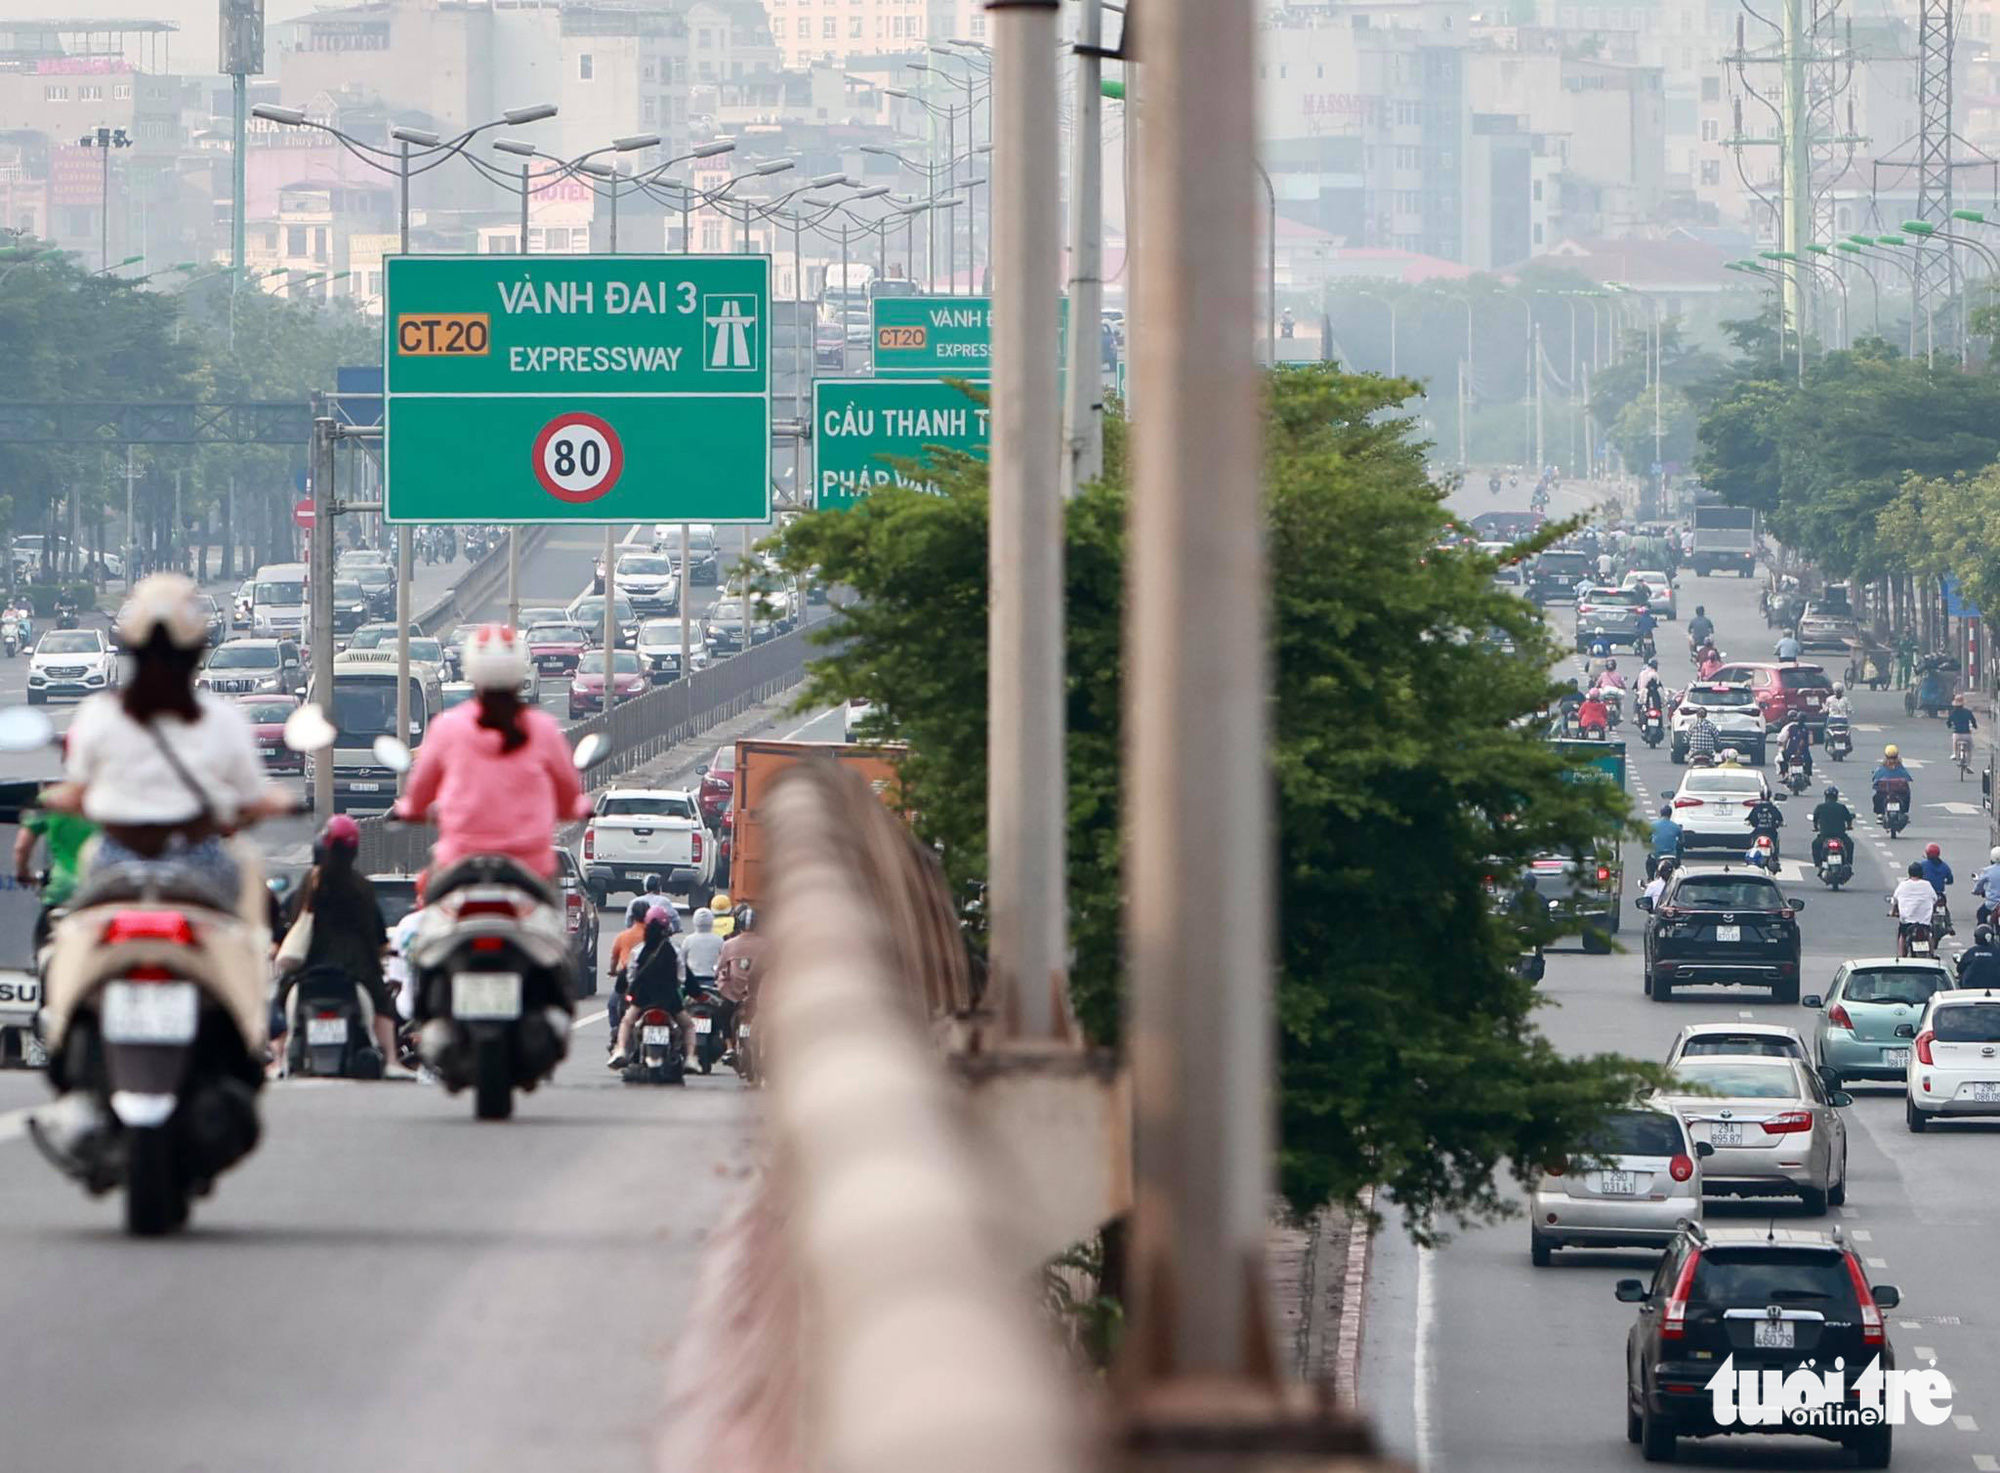 Vehicles crowd the Mai Dich Overpass in Cau Giay District, Hanoi, September 21, 2021. Photo: Tuoi Tre